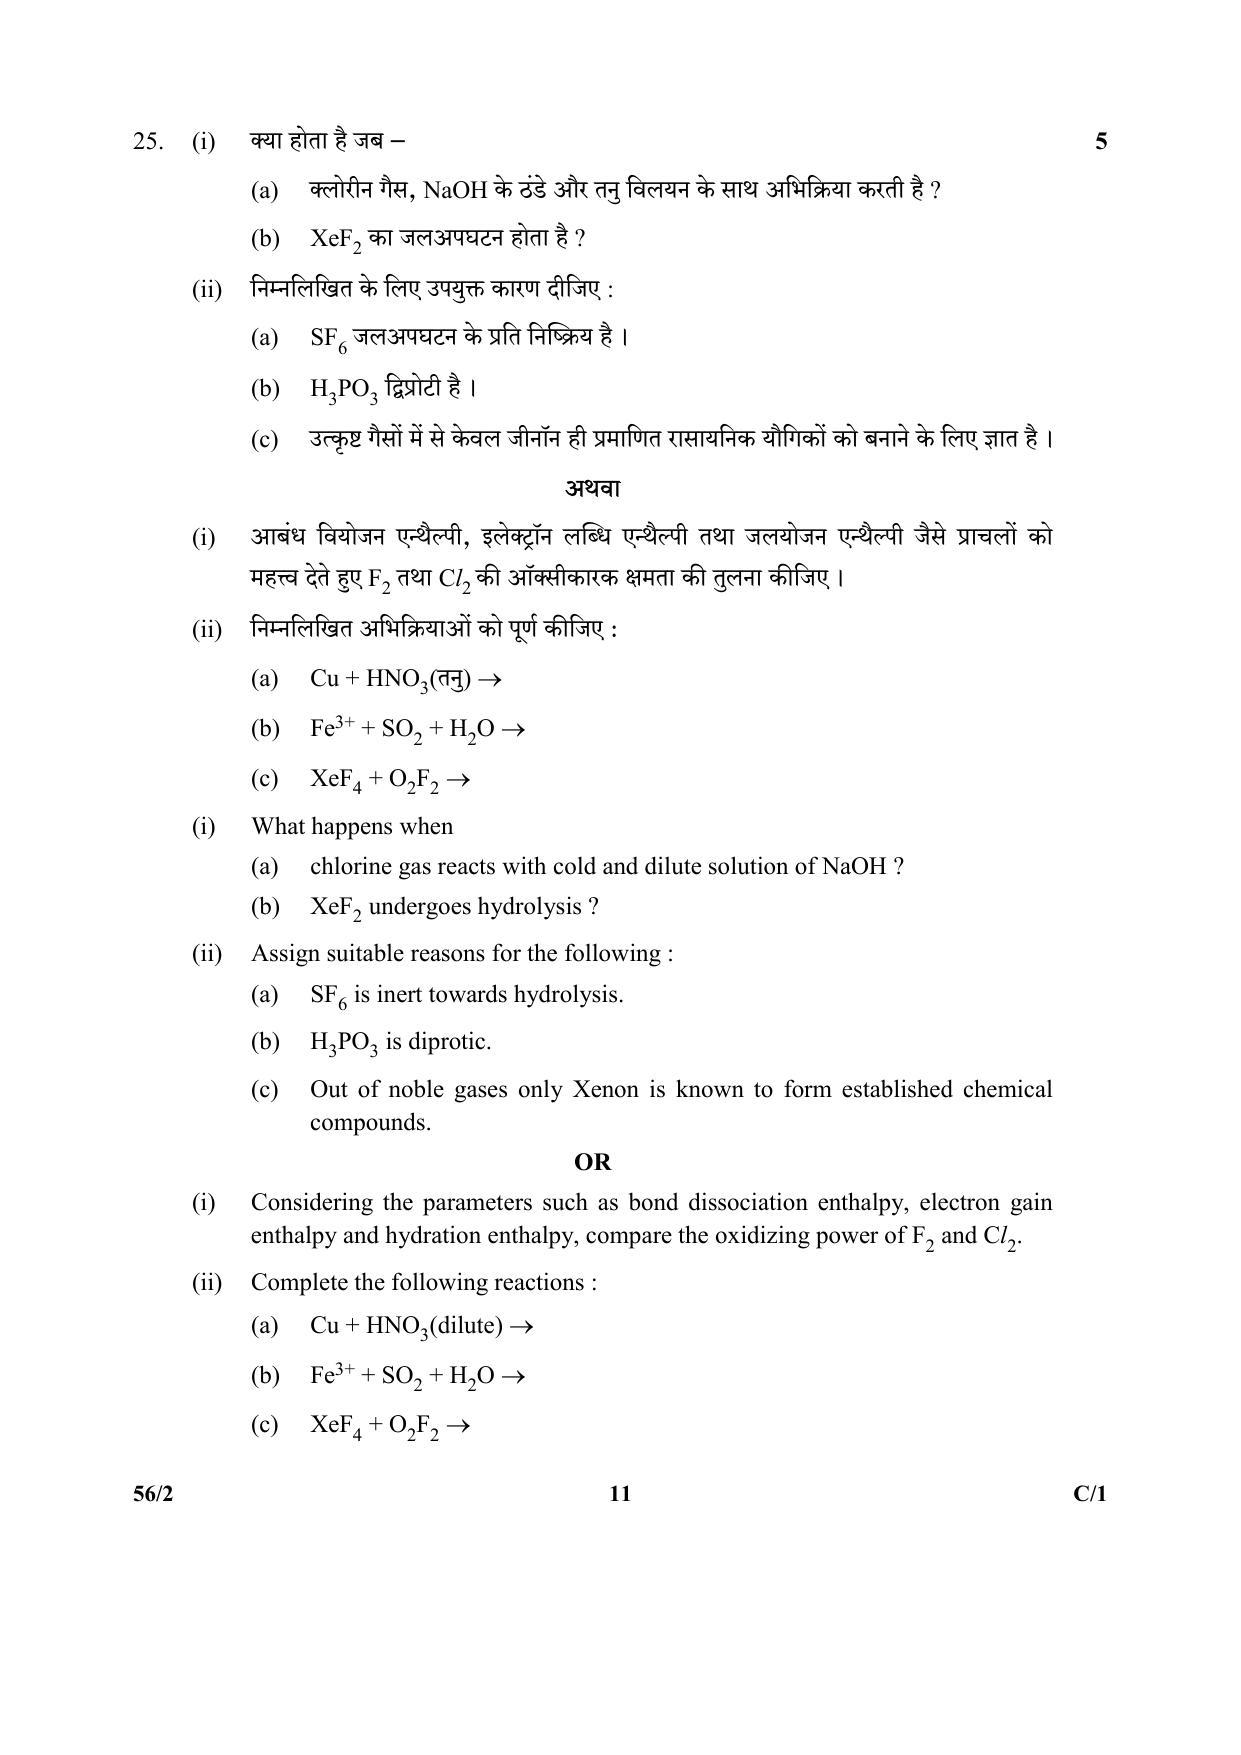 CBSE Class 12 56-2 (Chemistry) 2018 Compartment Question Paper - Page 11